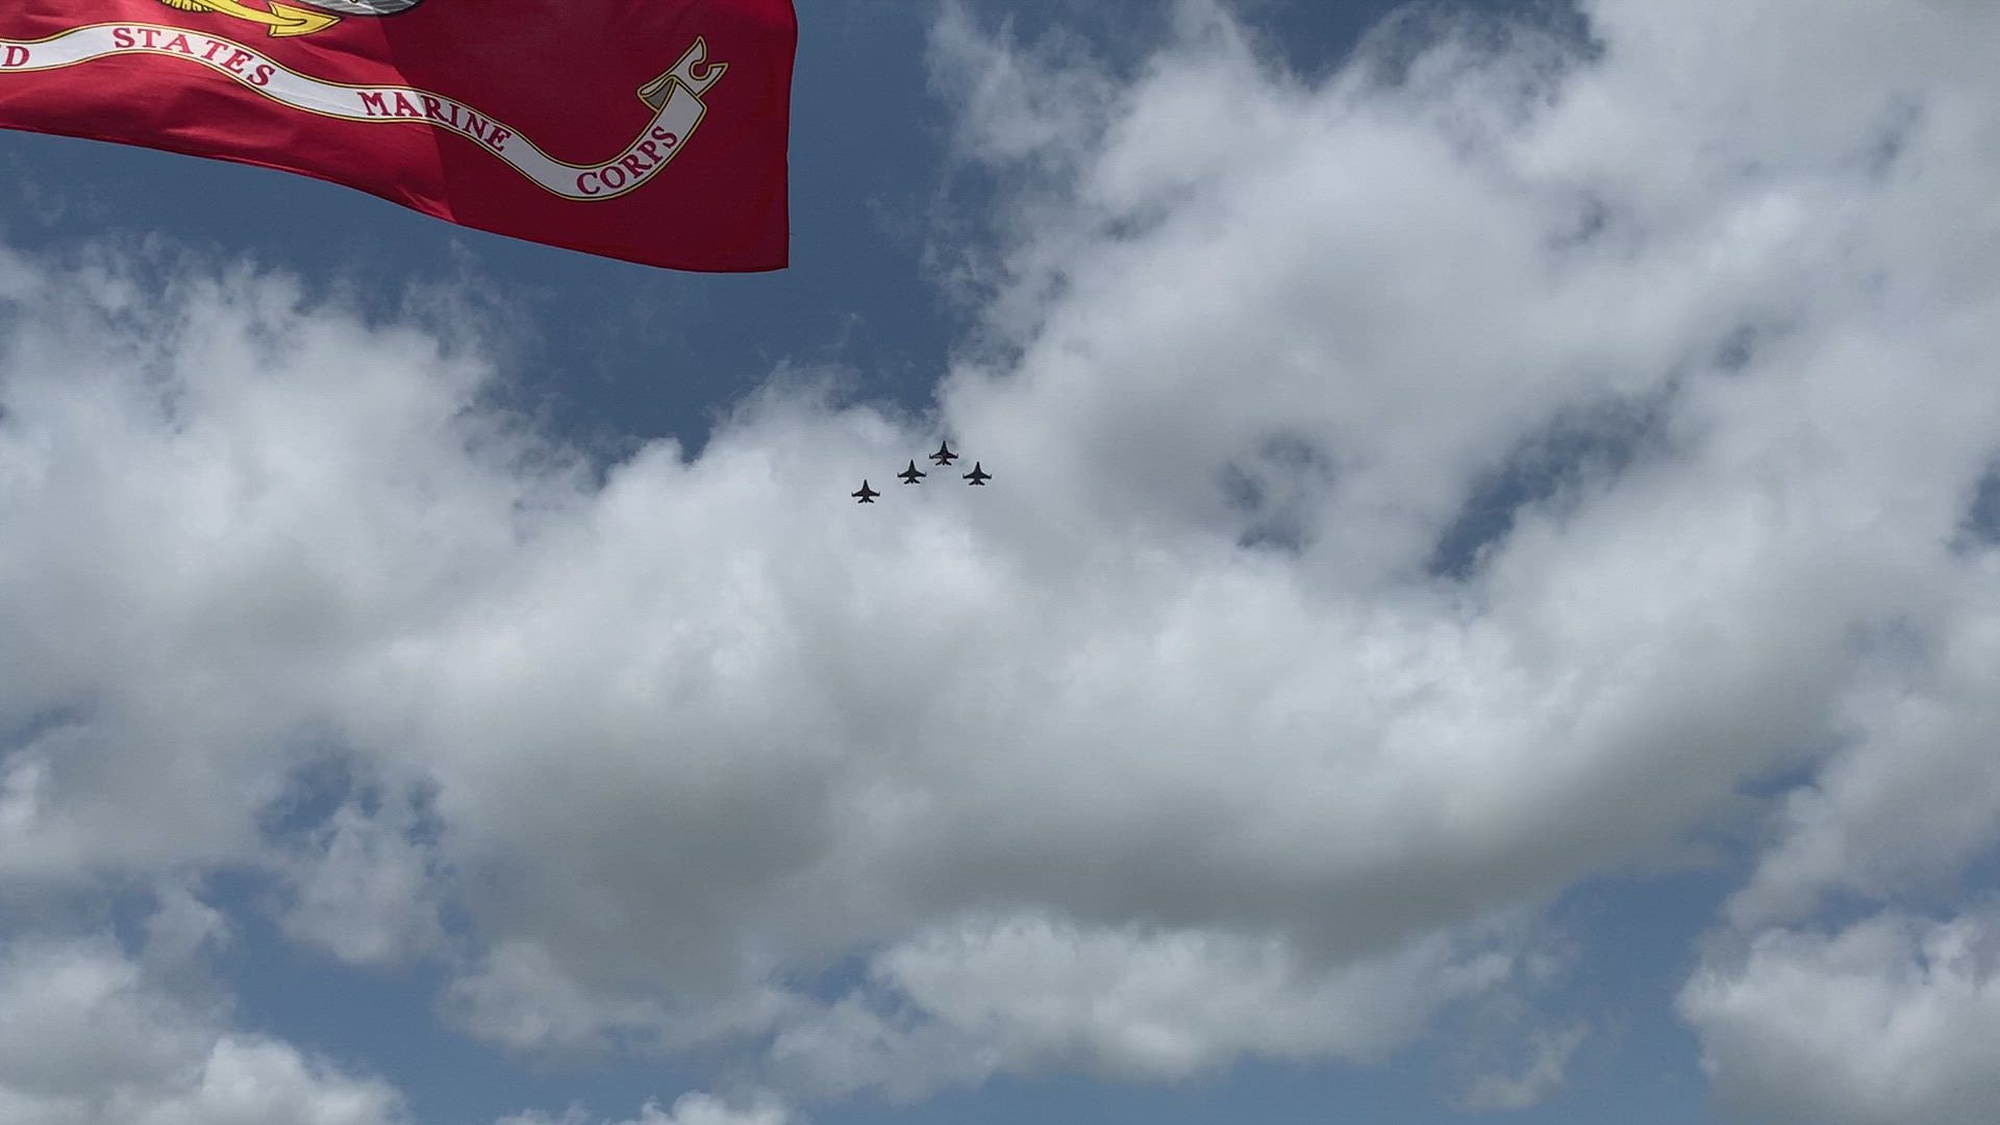 Four F-16s from the 301st Fighter Wing at NAS Fort Worth JRB, Texas, flyover the Dallas-Fort Worth National Cemetery in a missing man formation, where the jets fly in a formation with a space where one jet should be, symbolizing the person's absence in honor of Memorial Day May 30, 2022. (U.S. Air Force video by Master Sgt. Lauren Kelly)